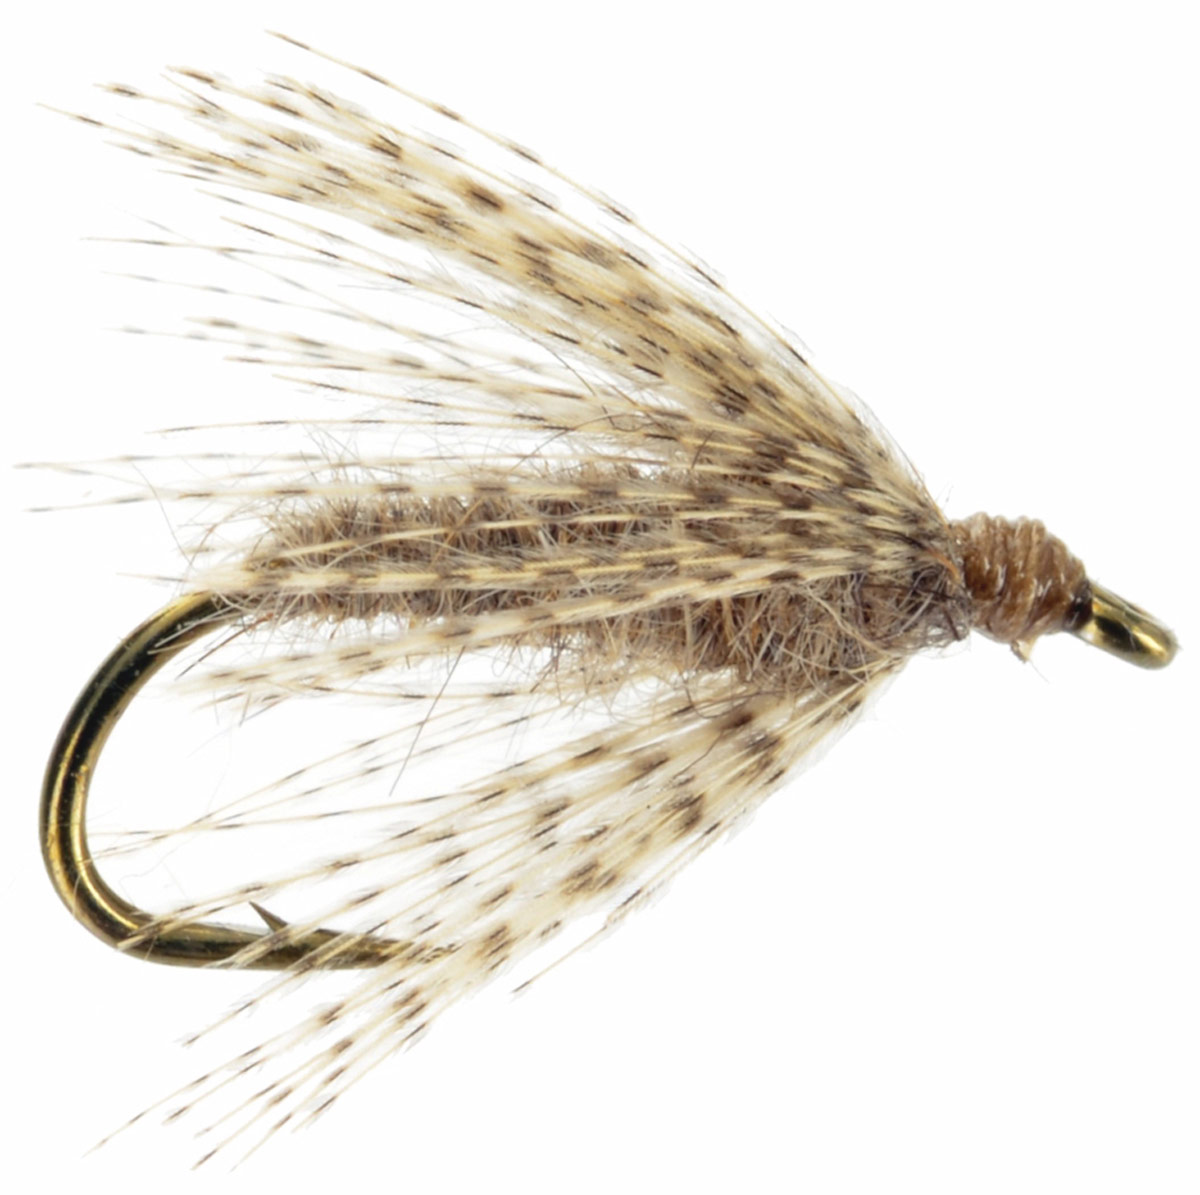 Soft Hackle - Hare's Ear, Fly Fishing Flies For Less